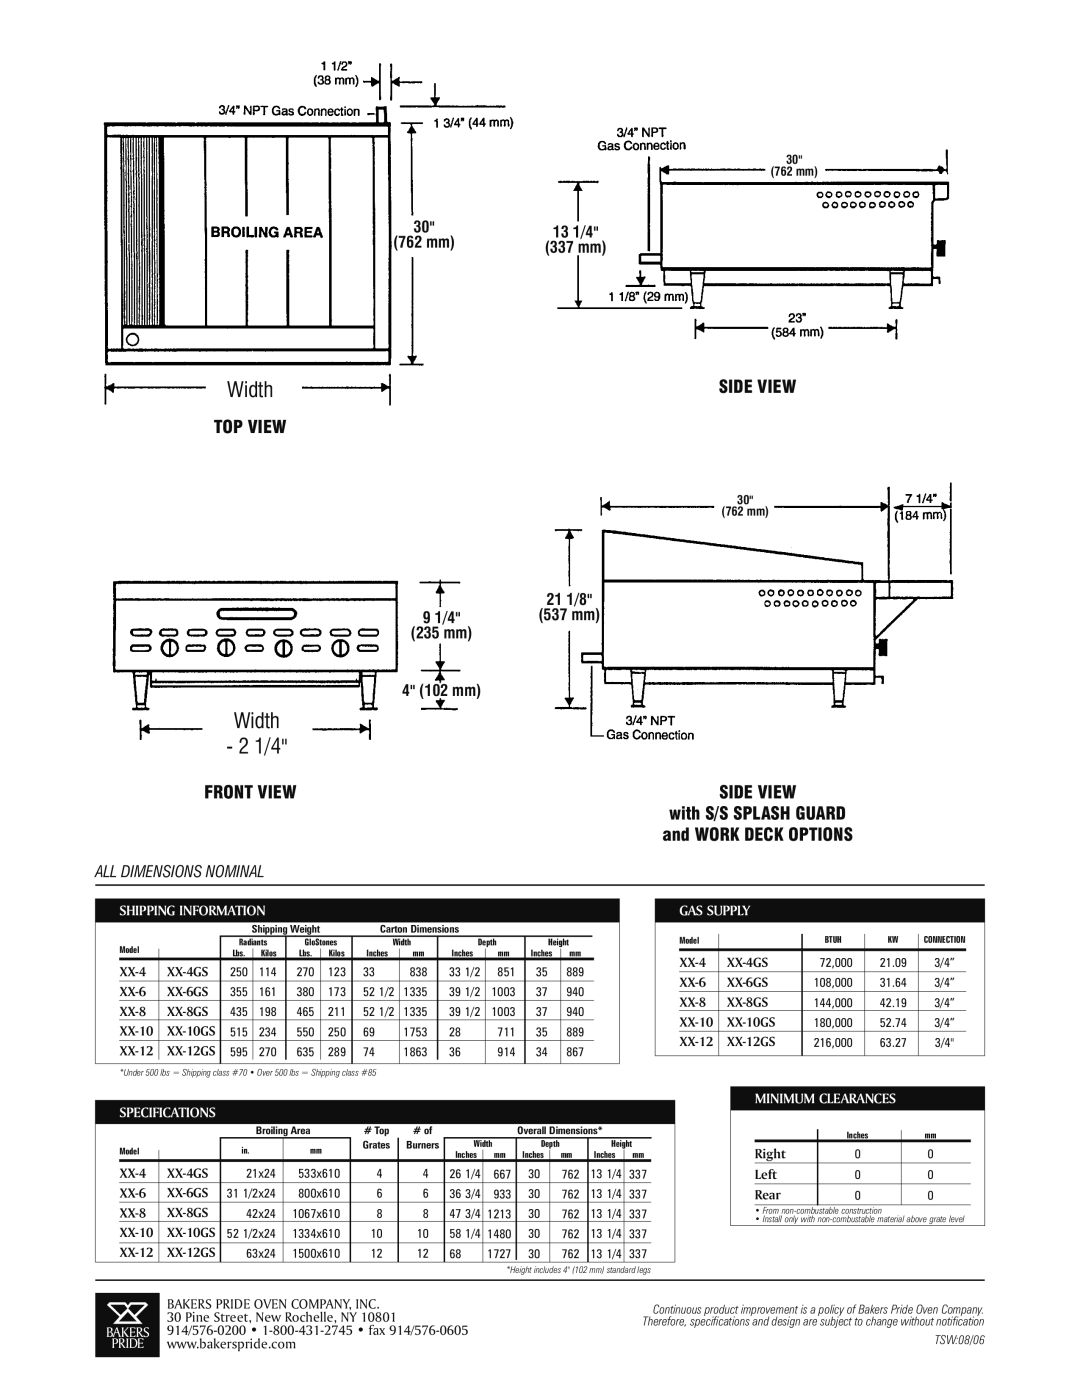 Bakers Pride Oven XX-4 q, XX-12 Width, 2 1/4, 13 1/4, 21 1/8, 9 1/4, 537 mm, All Dimensions Nominal, Shipping Information 